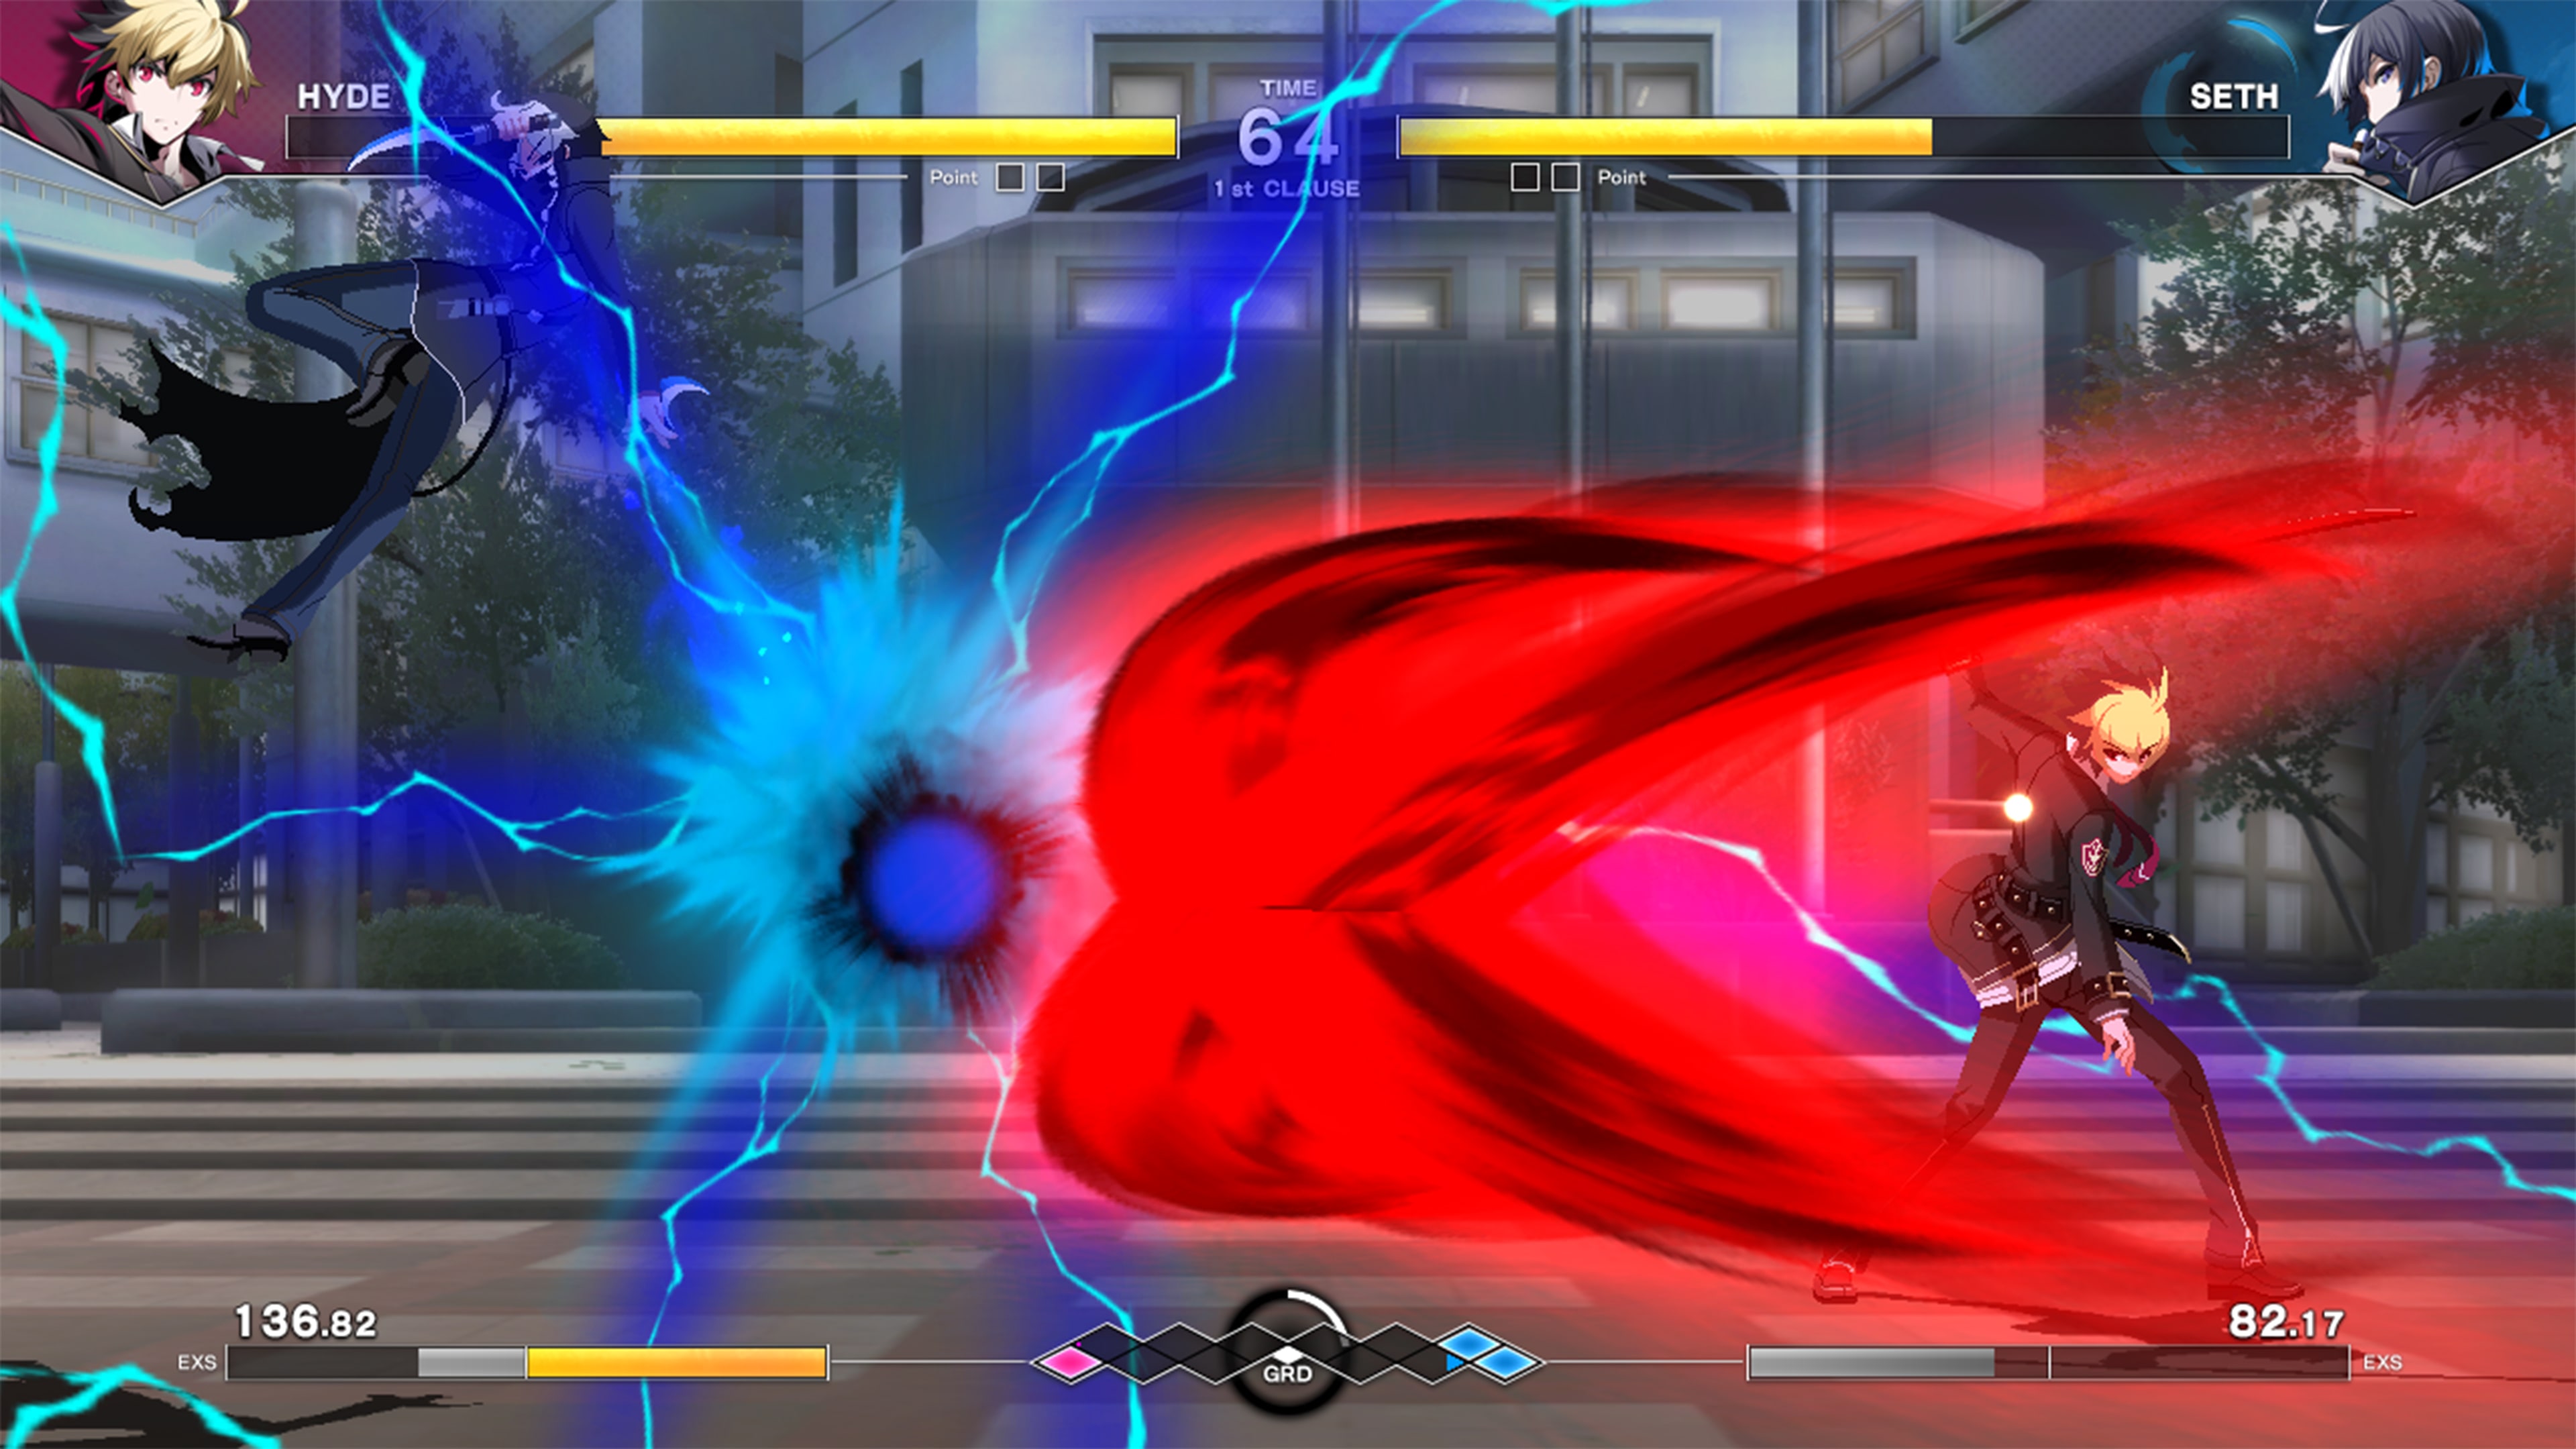 Under Night In-Birth 2 Sys:Celes gets PlayStation Open Beta this